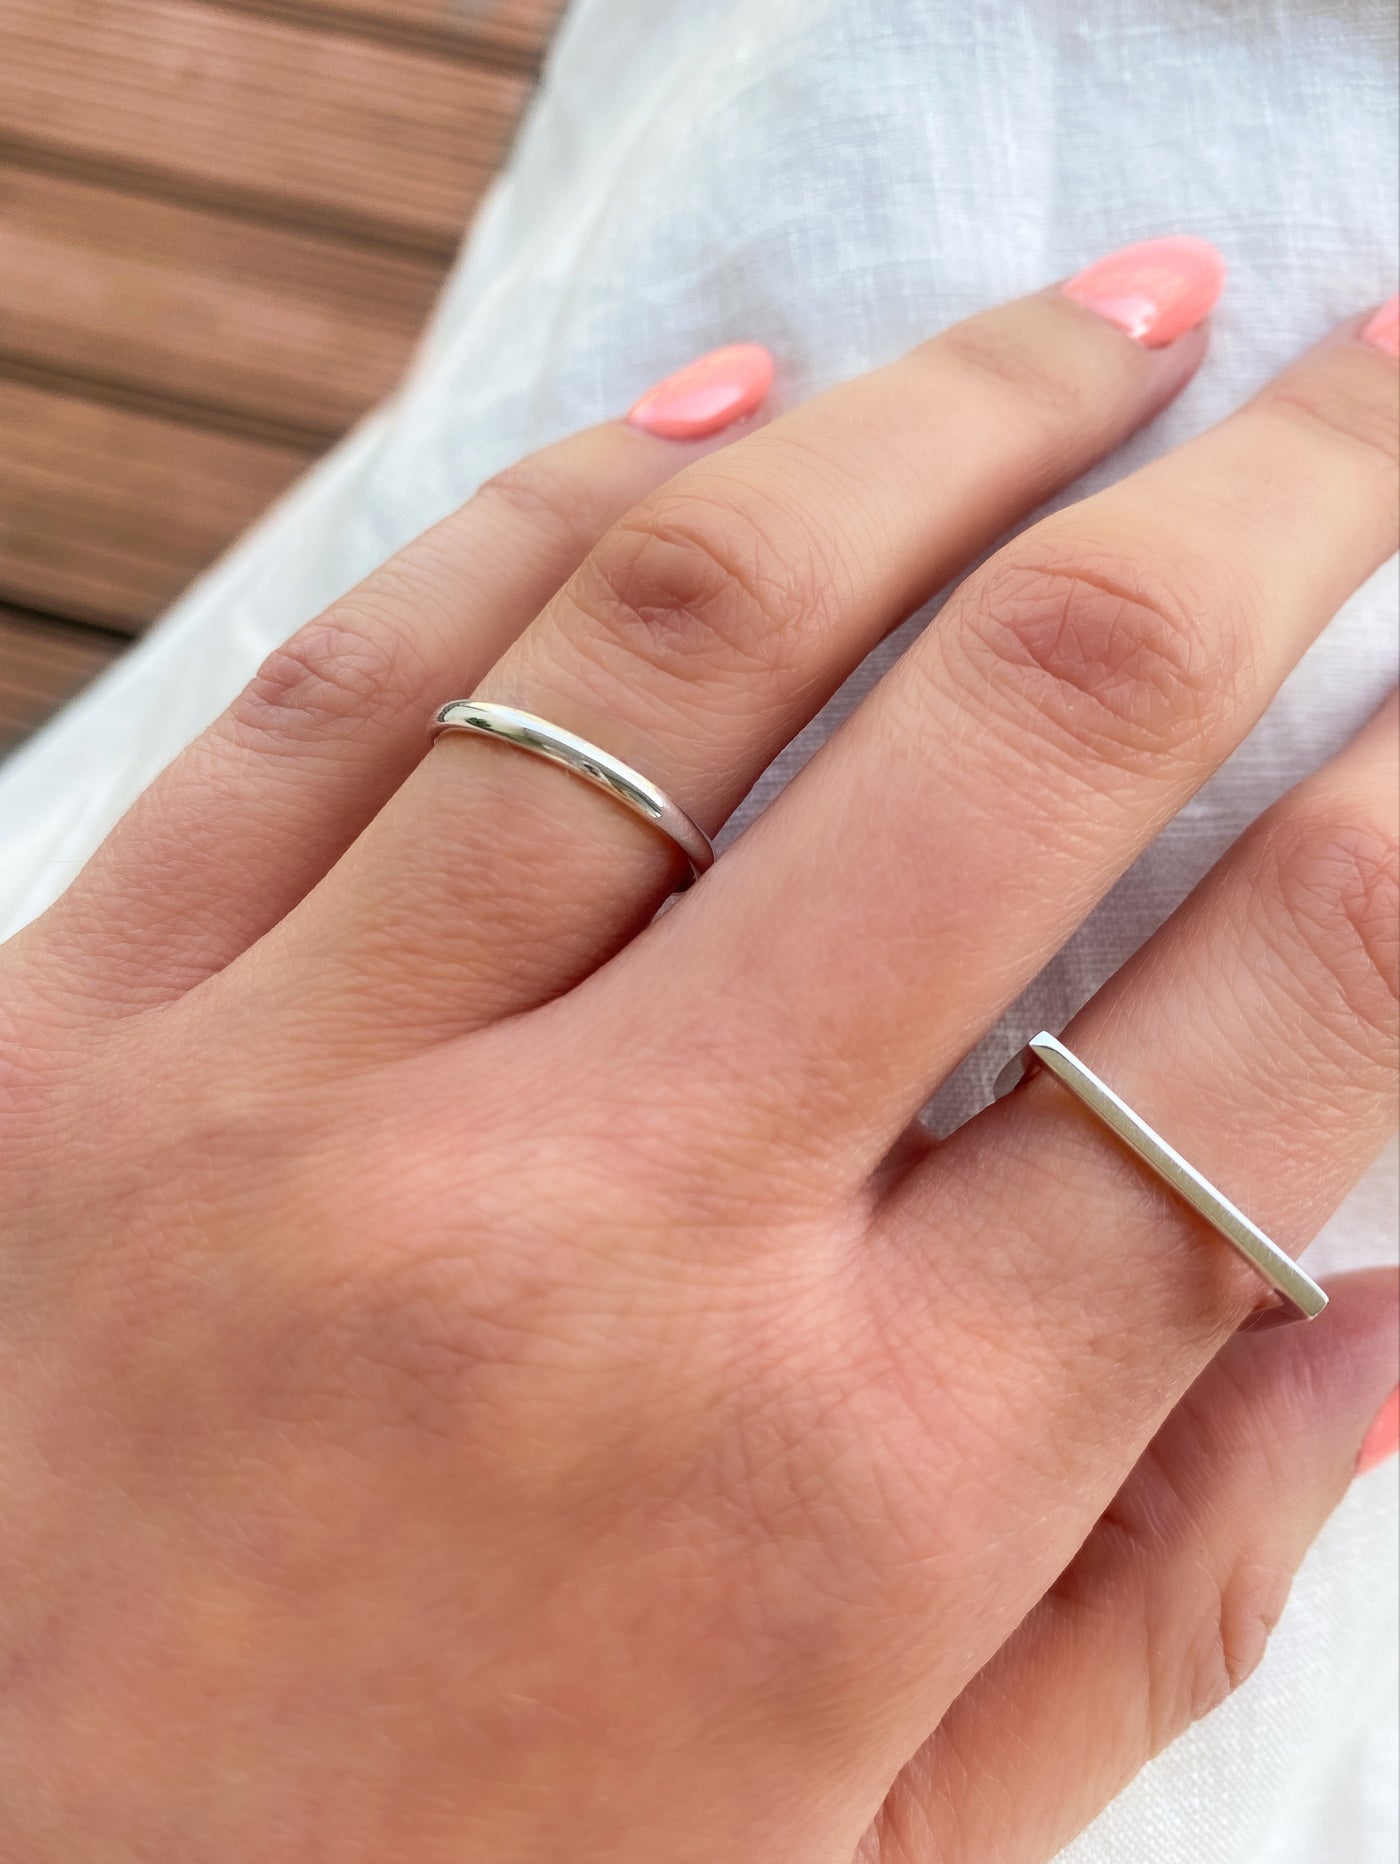 Model wearing sterling silver minimal ring with simple, plain ring band